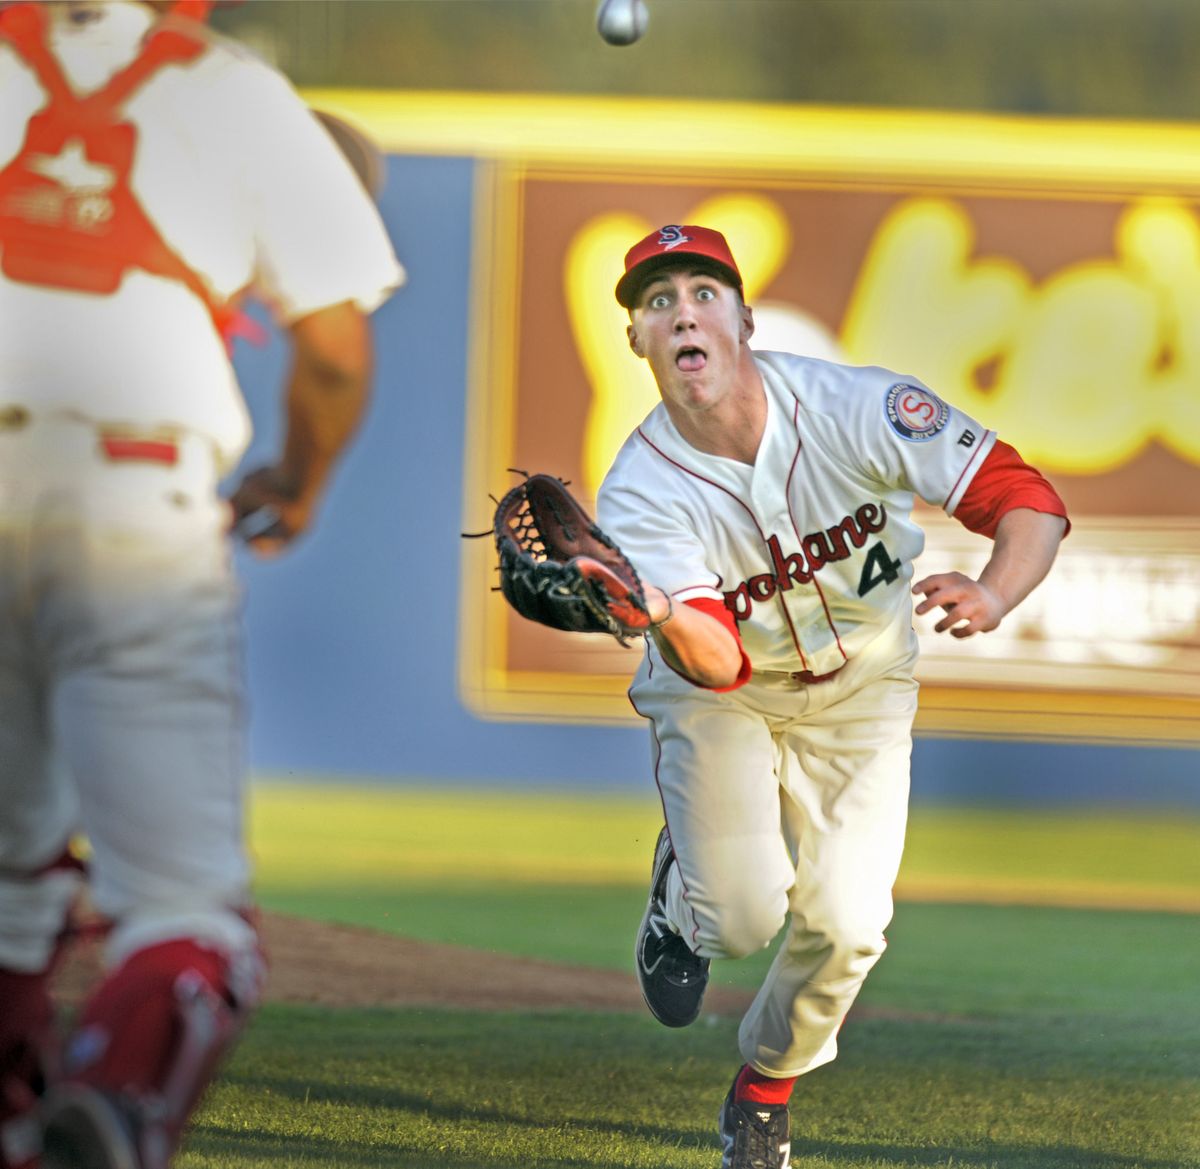 Spokane Indians pitcher Kevin Matthews is all eyeballs as he charges off the mound to catch a pop-up on a bunt attempt. (Christopher Anderson)